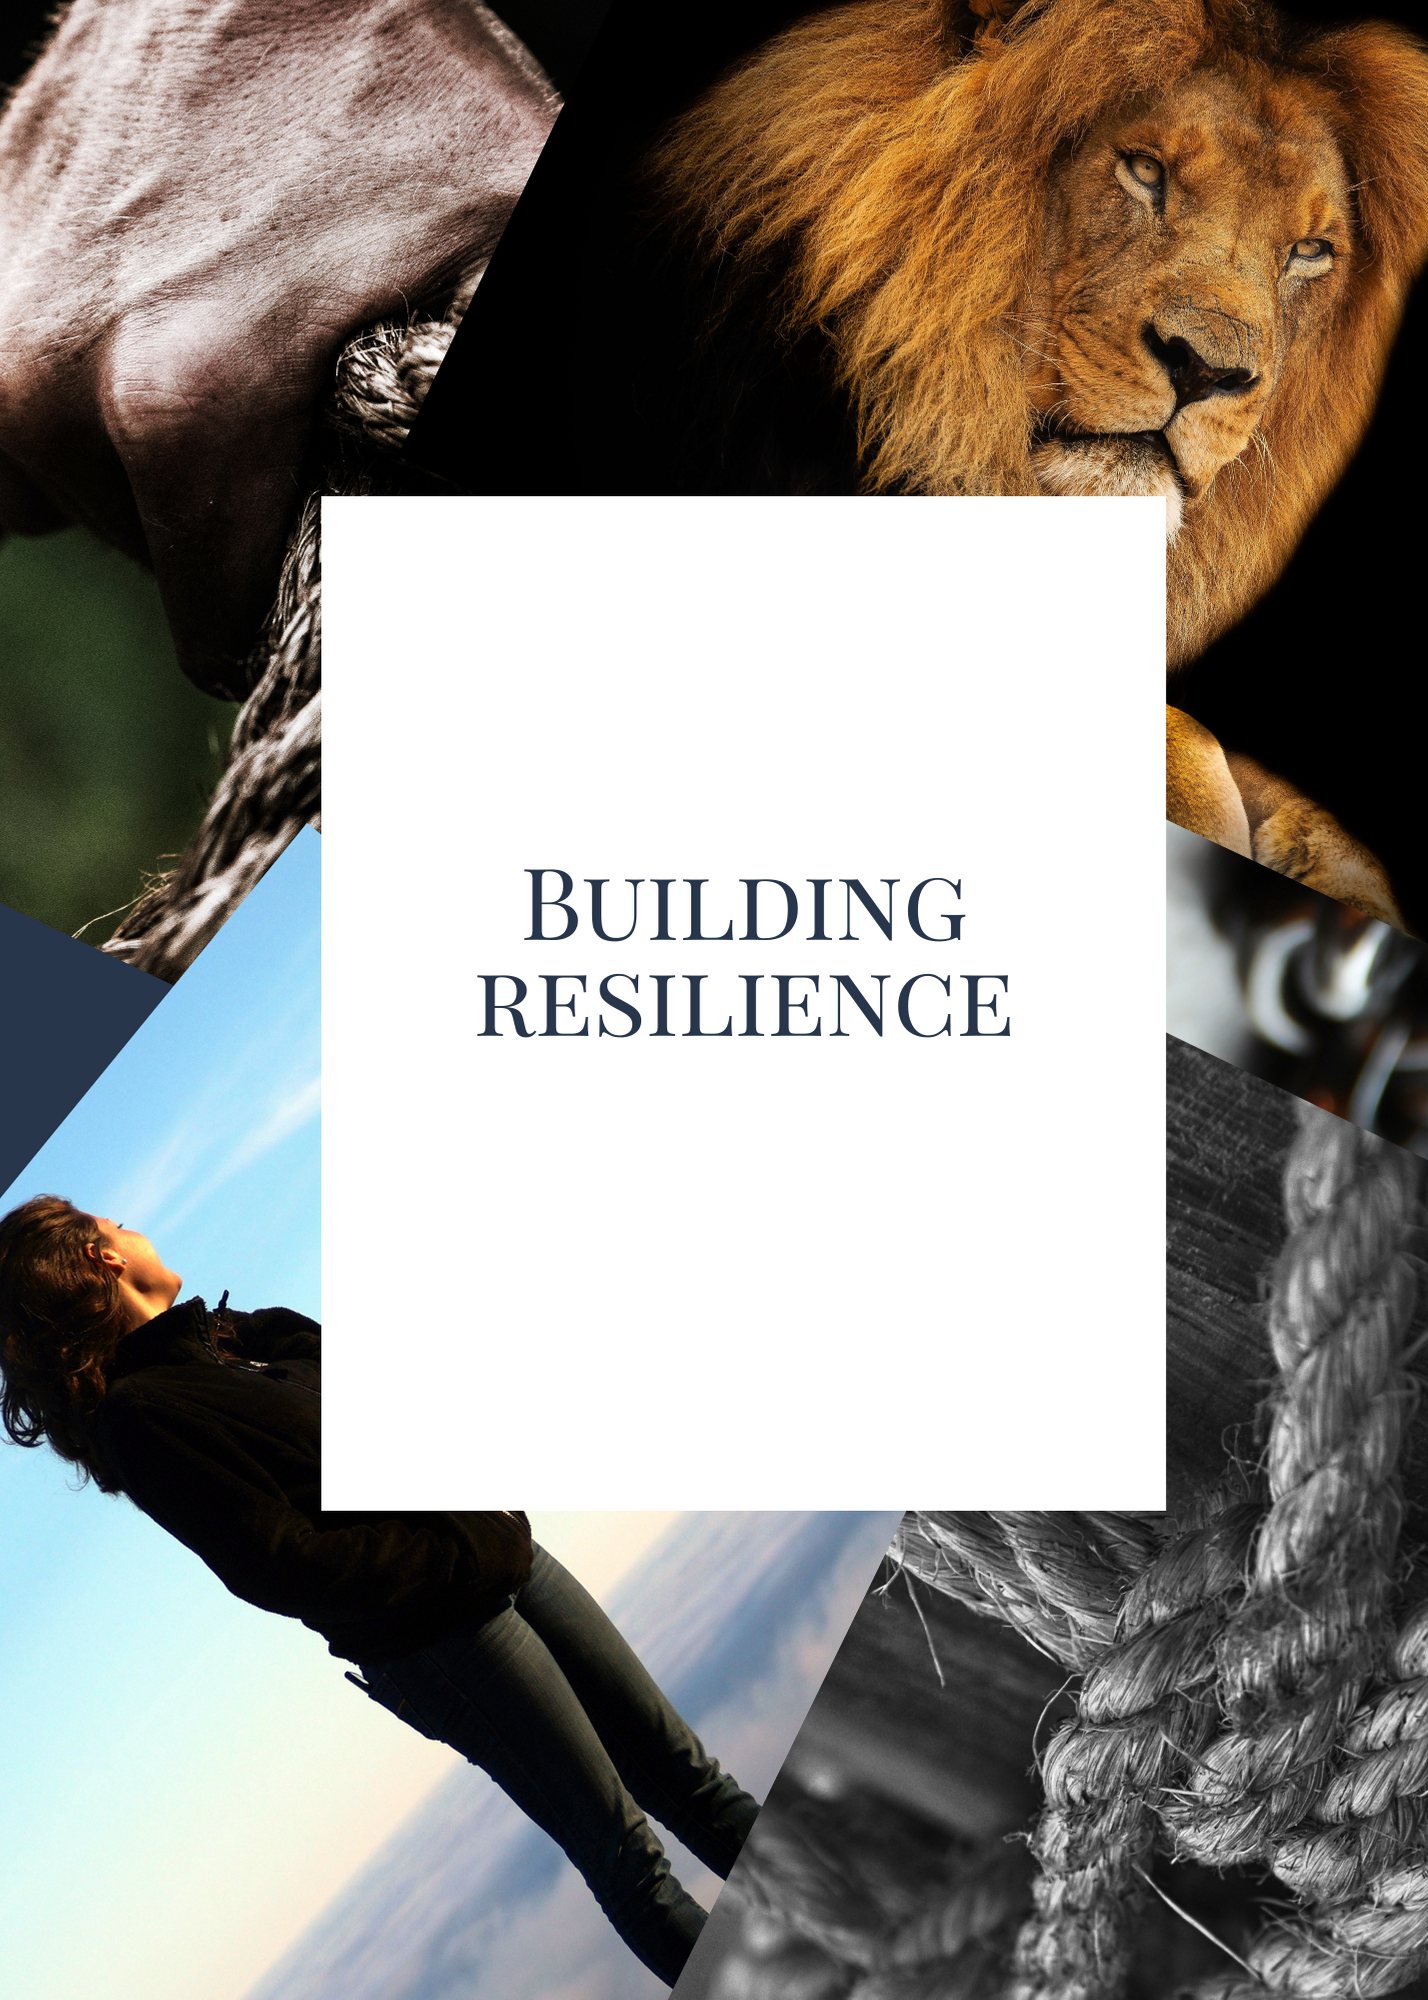 Resilience Training in Northern Ireland